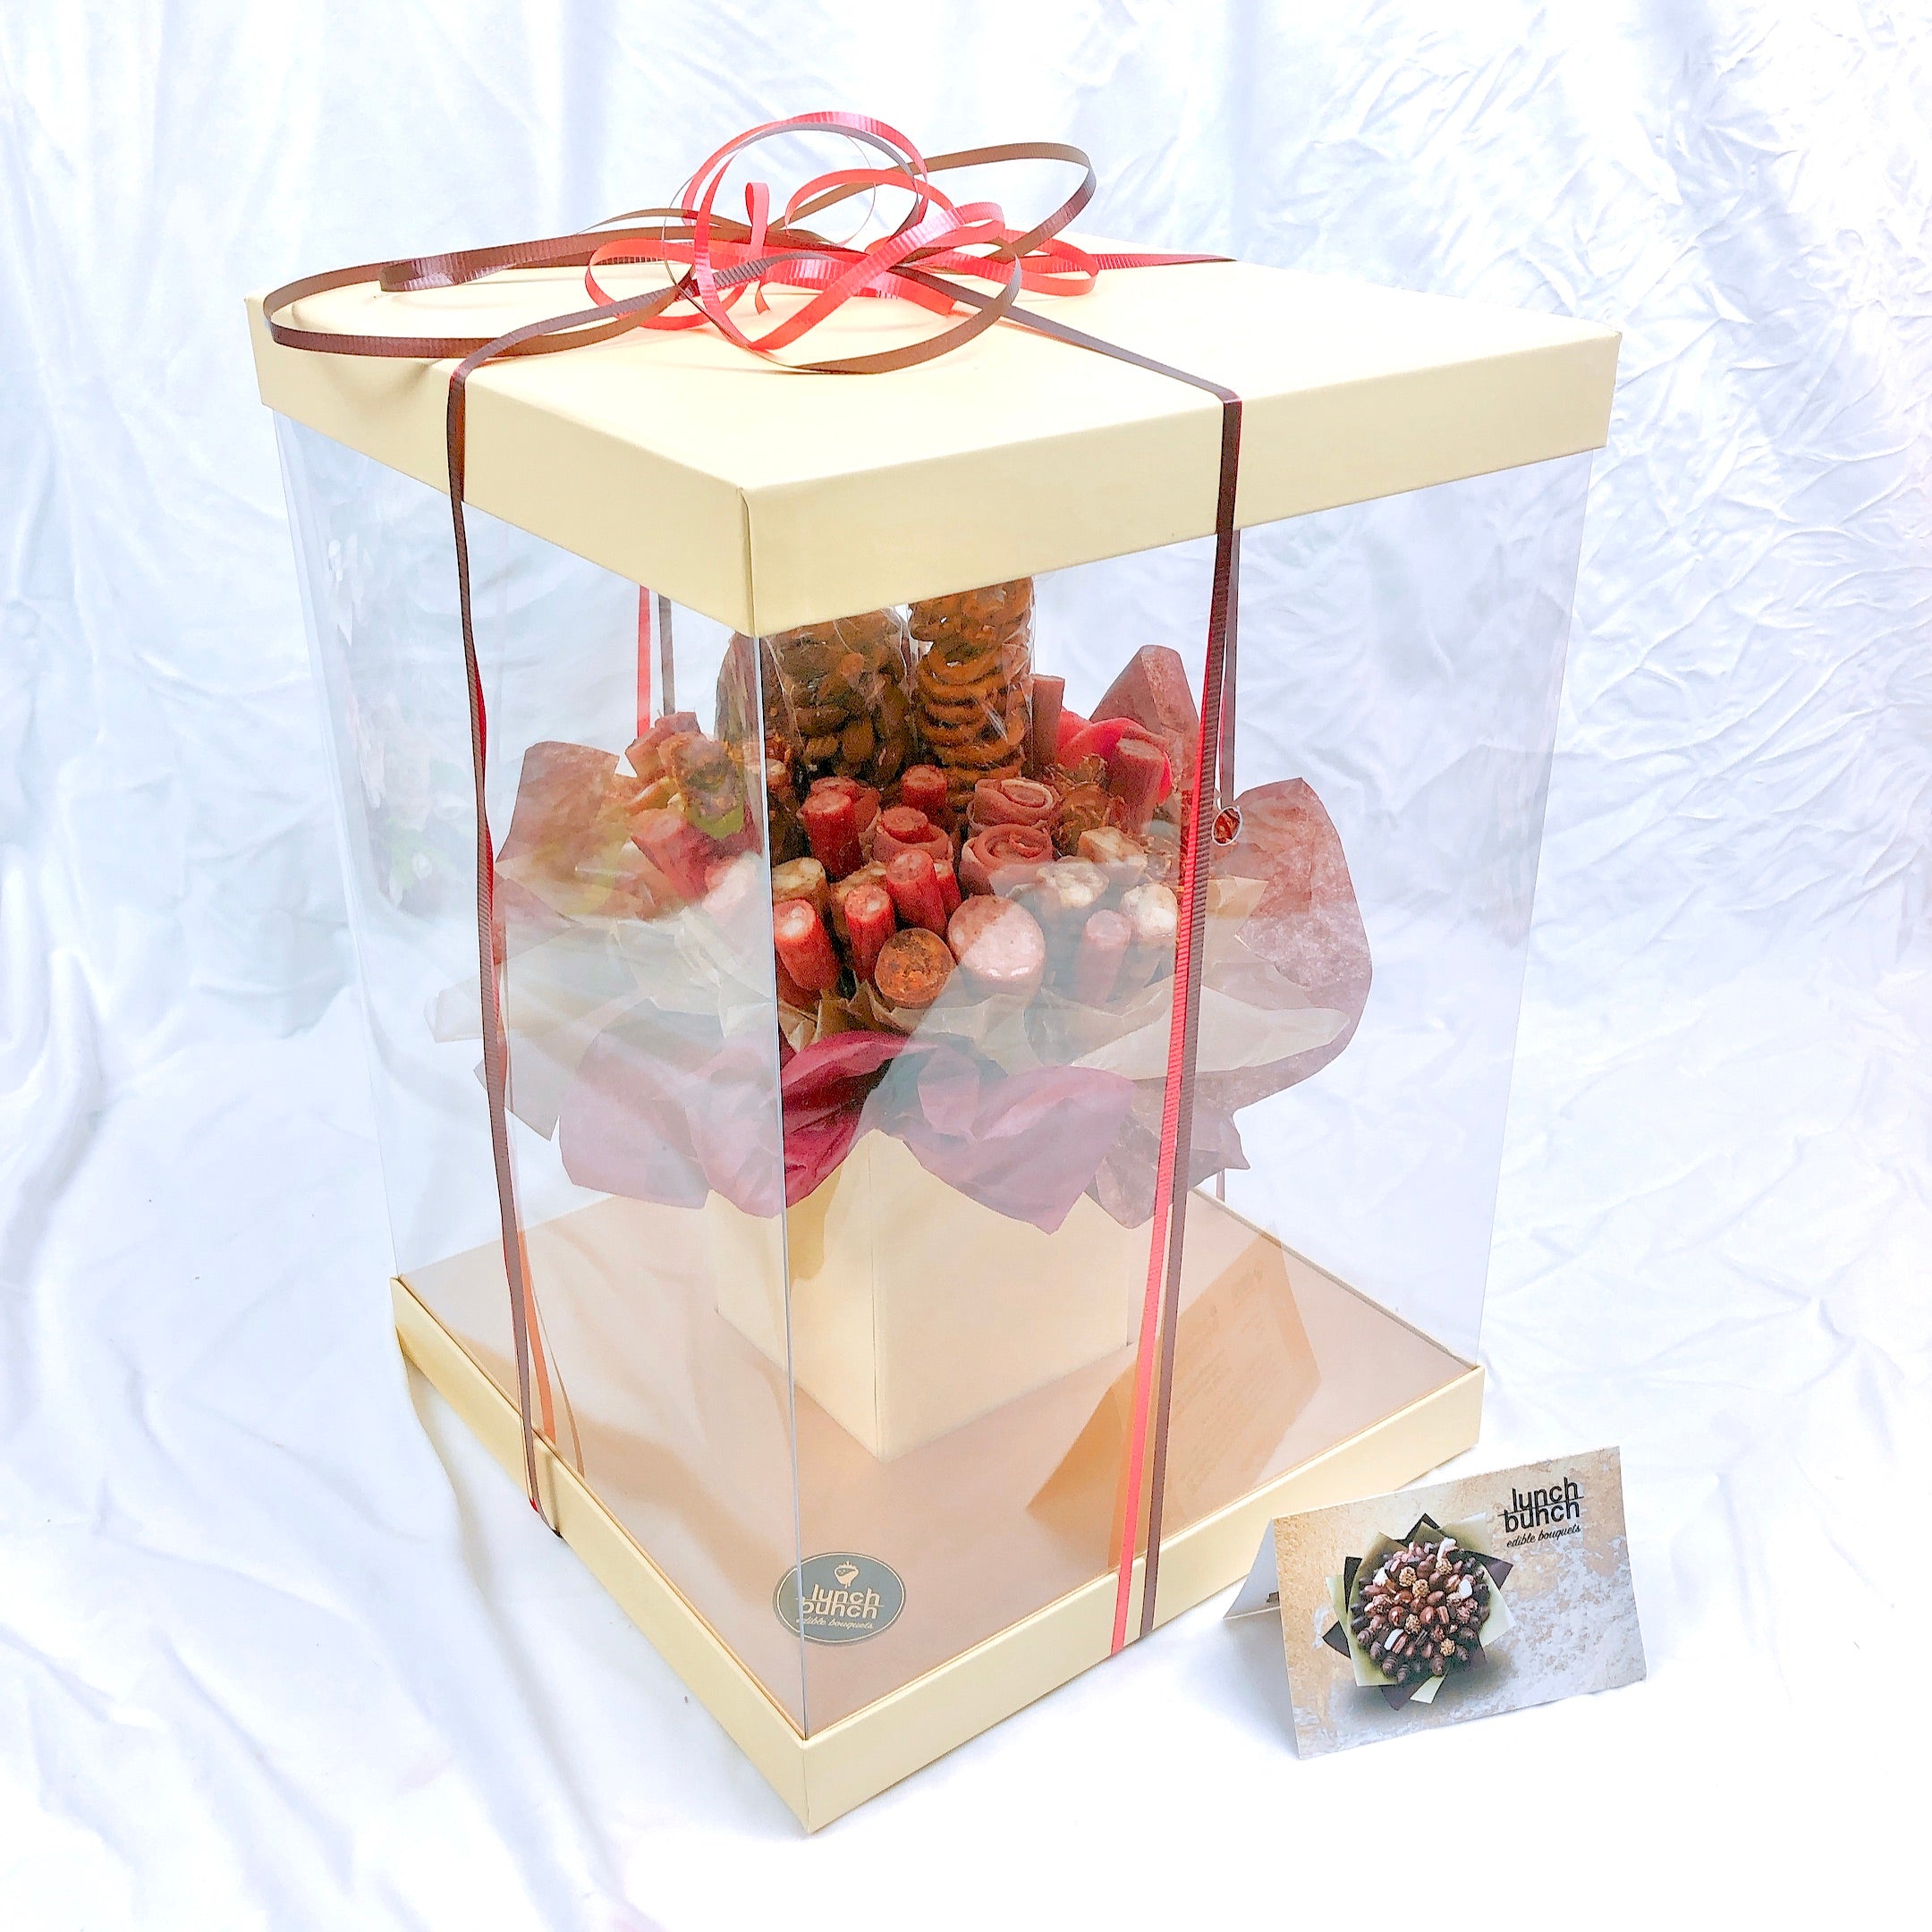 Prosciutto Roses Meat & Cheese Bouquet medium size in luxury gift box